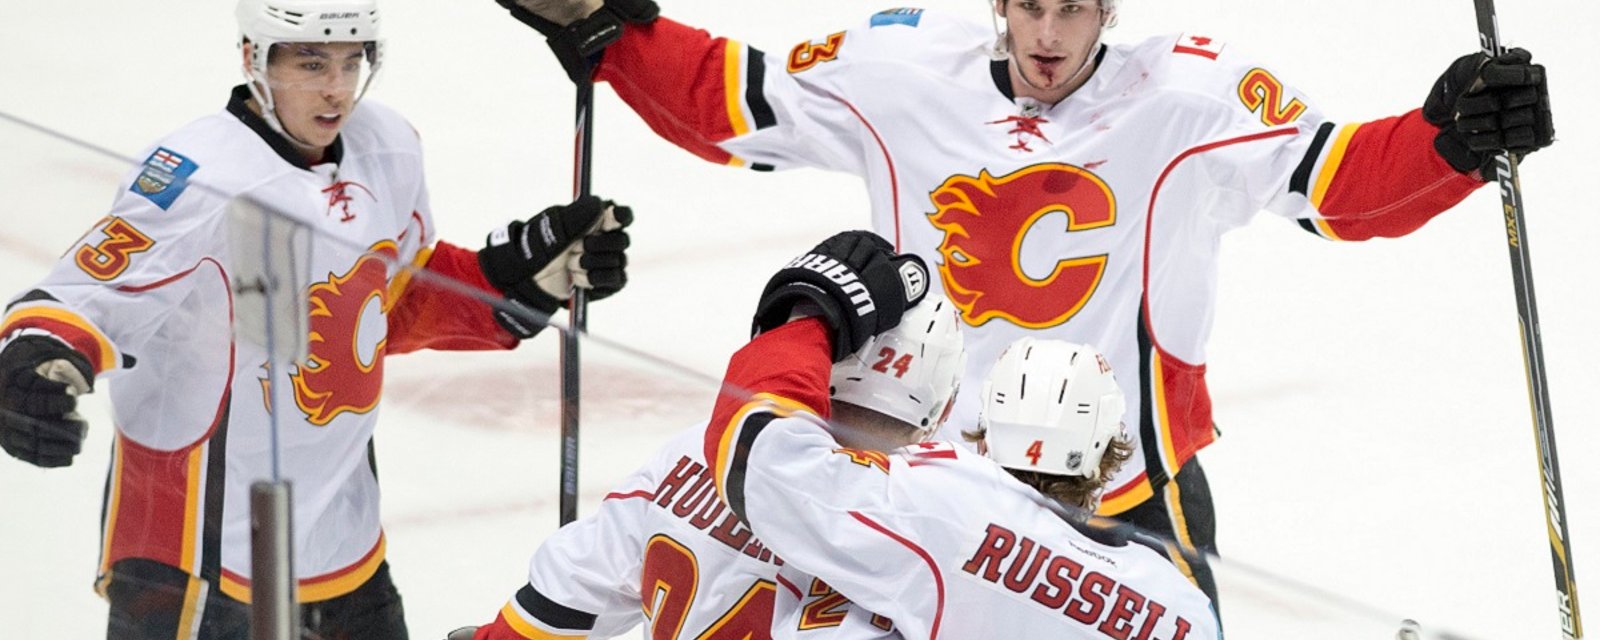 Flames forward has also been ruled out of the World Cup tournament.